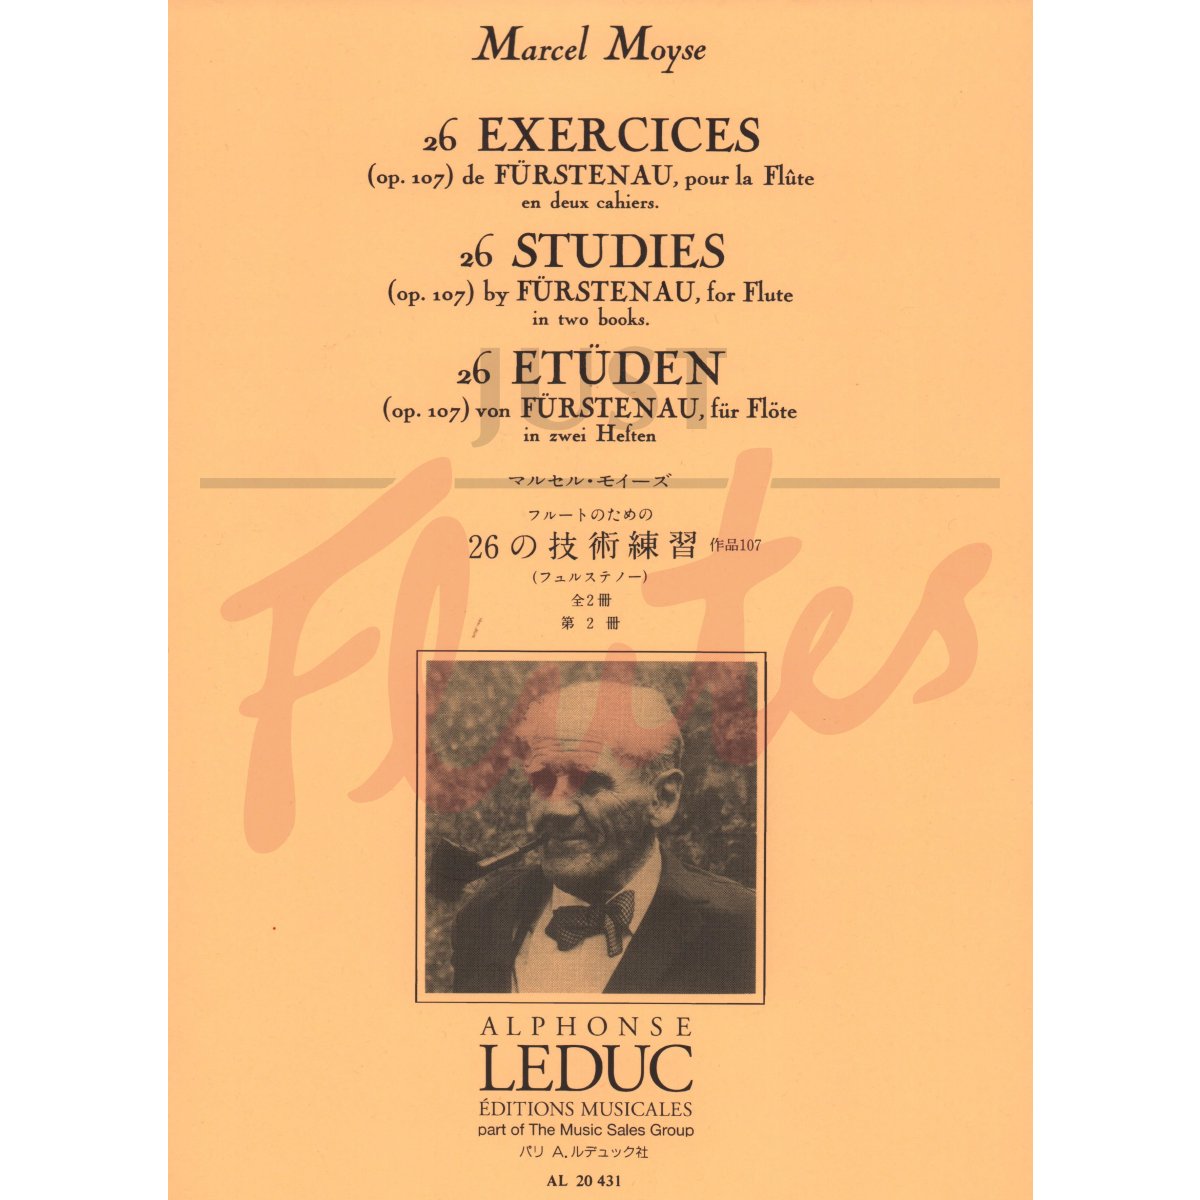 26 Exercises by Furstenau, Vol 2 for Flute